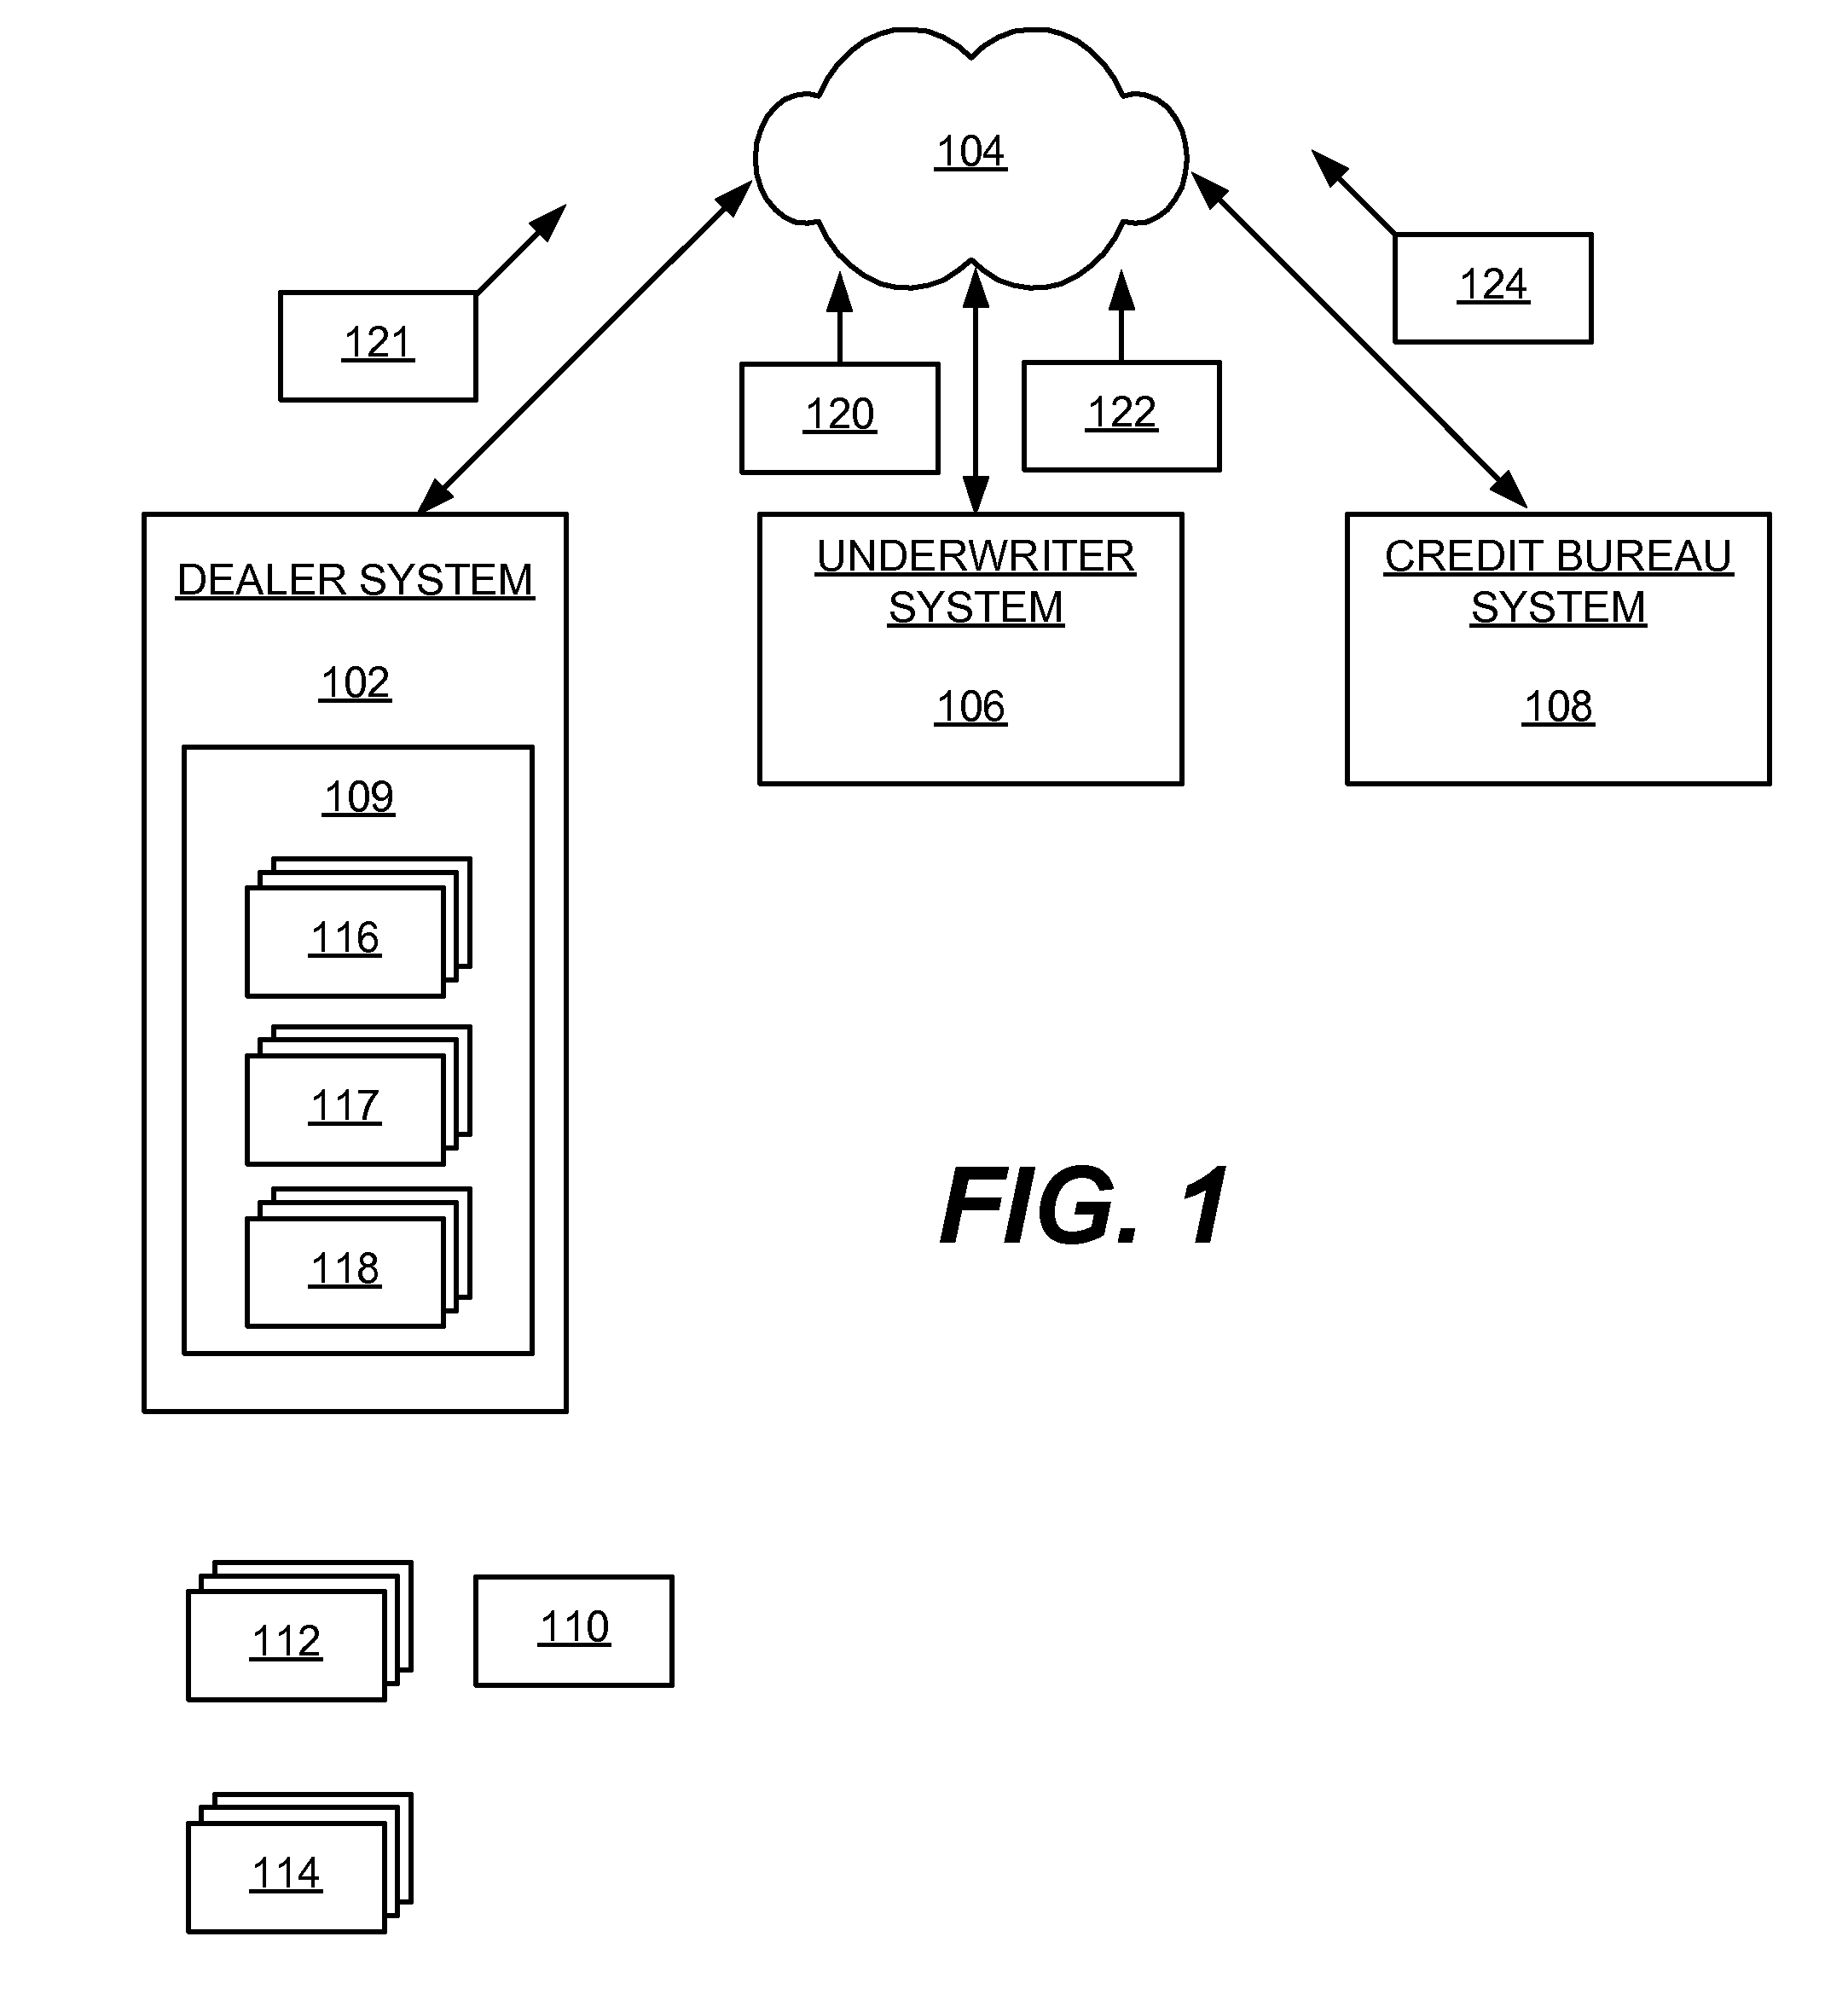 Method and system for providing financing